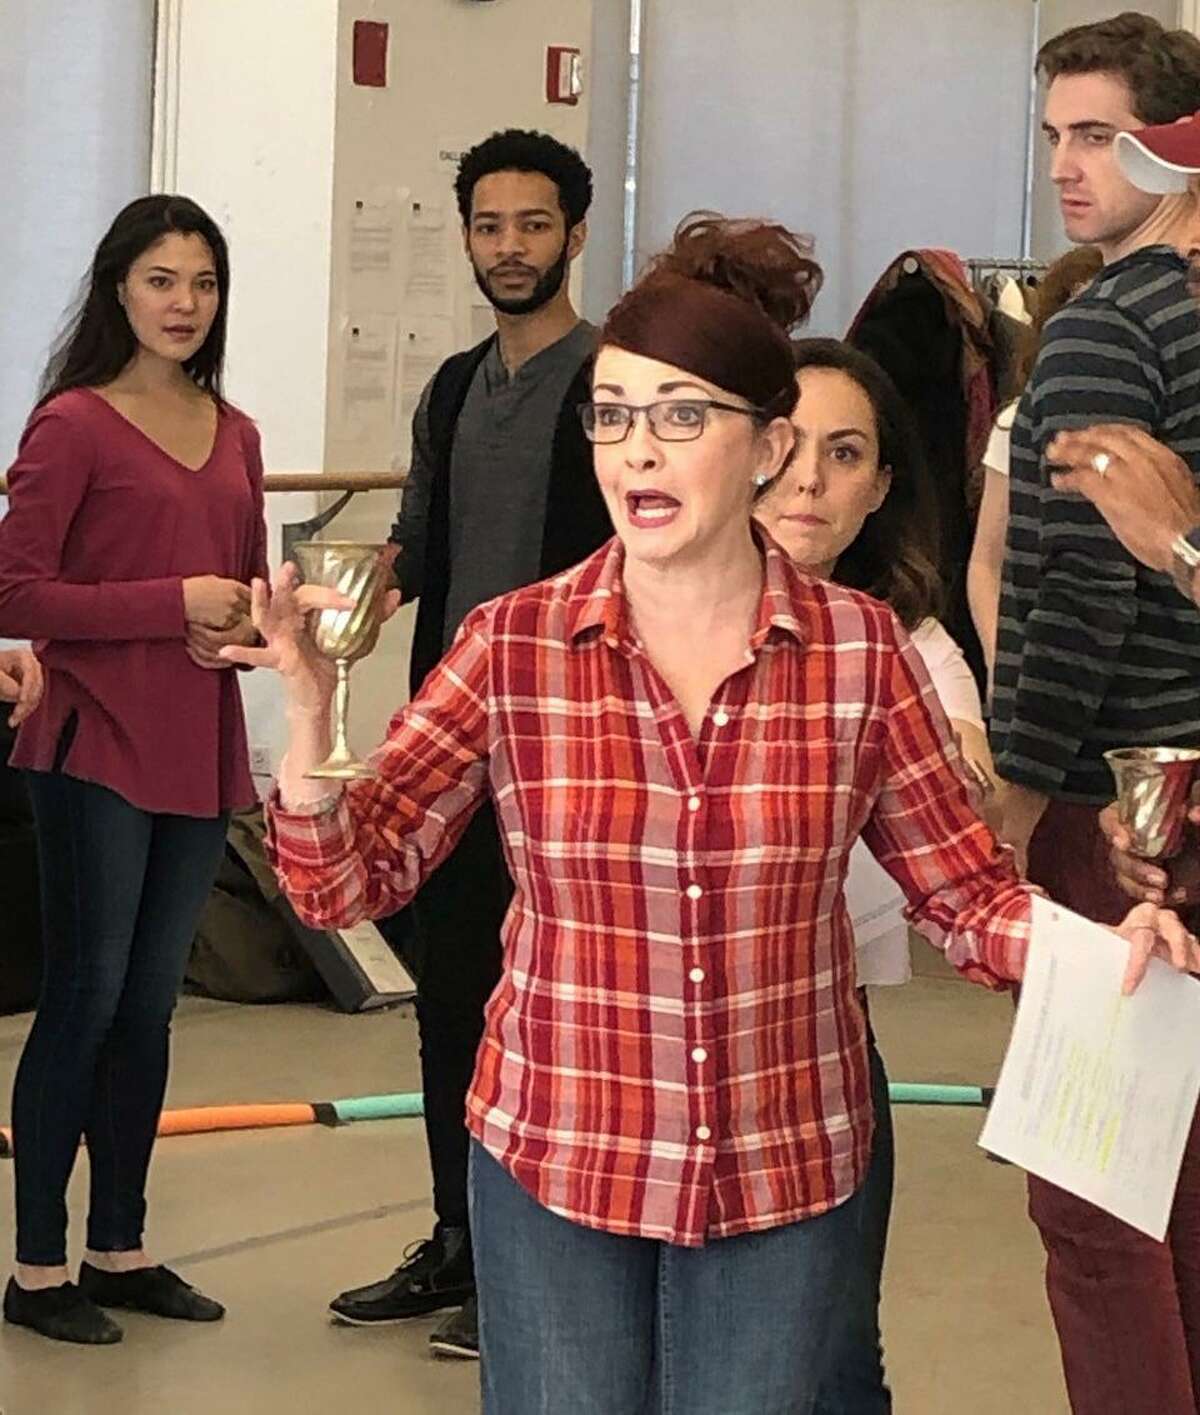 Actors rehearse in New York City for “Austen’s Pride, a new musical of Pride and Prejudice,” which will premiere in Ridgefield at ACT (A Contemporary Theatre) of Connecticut. The show runs March 30 through April 14.